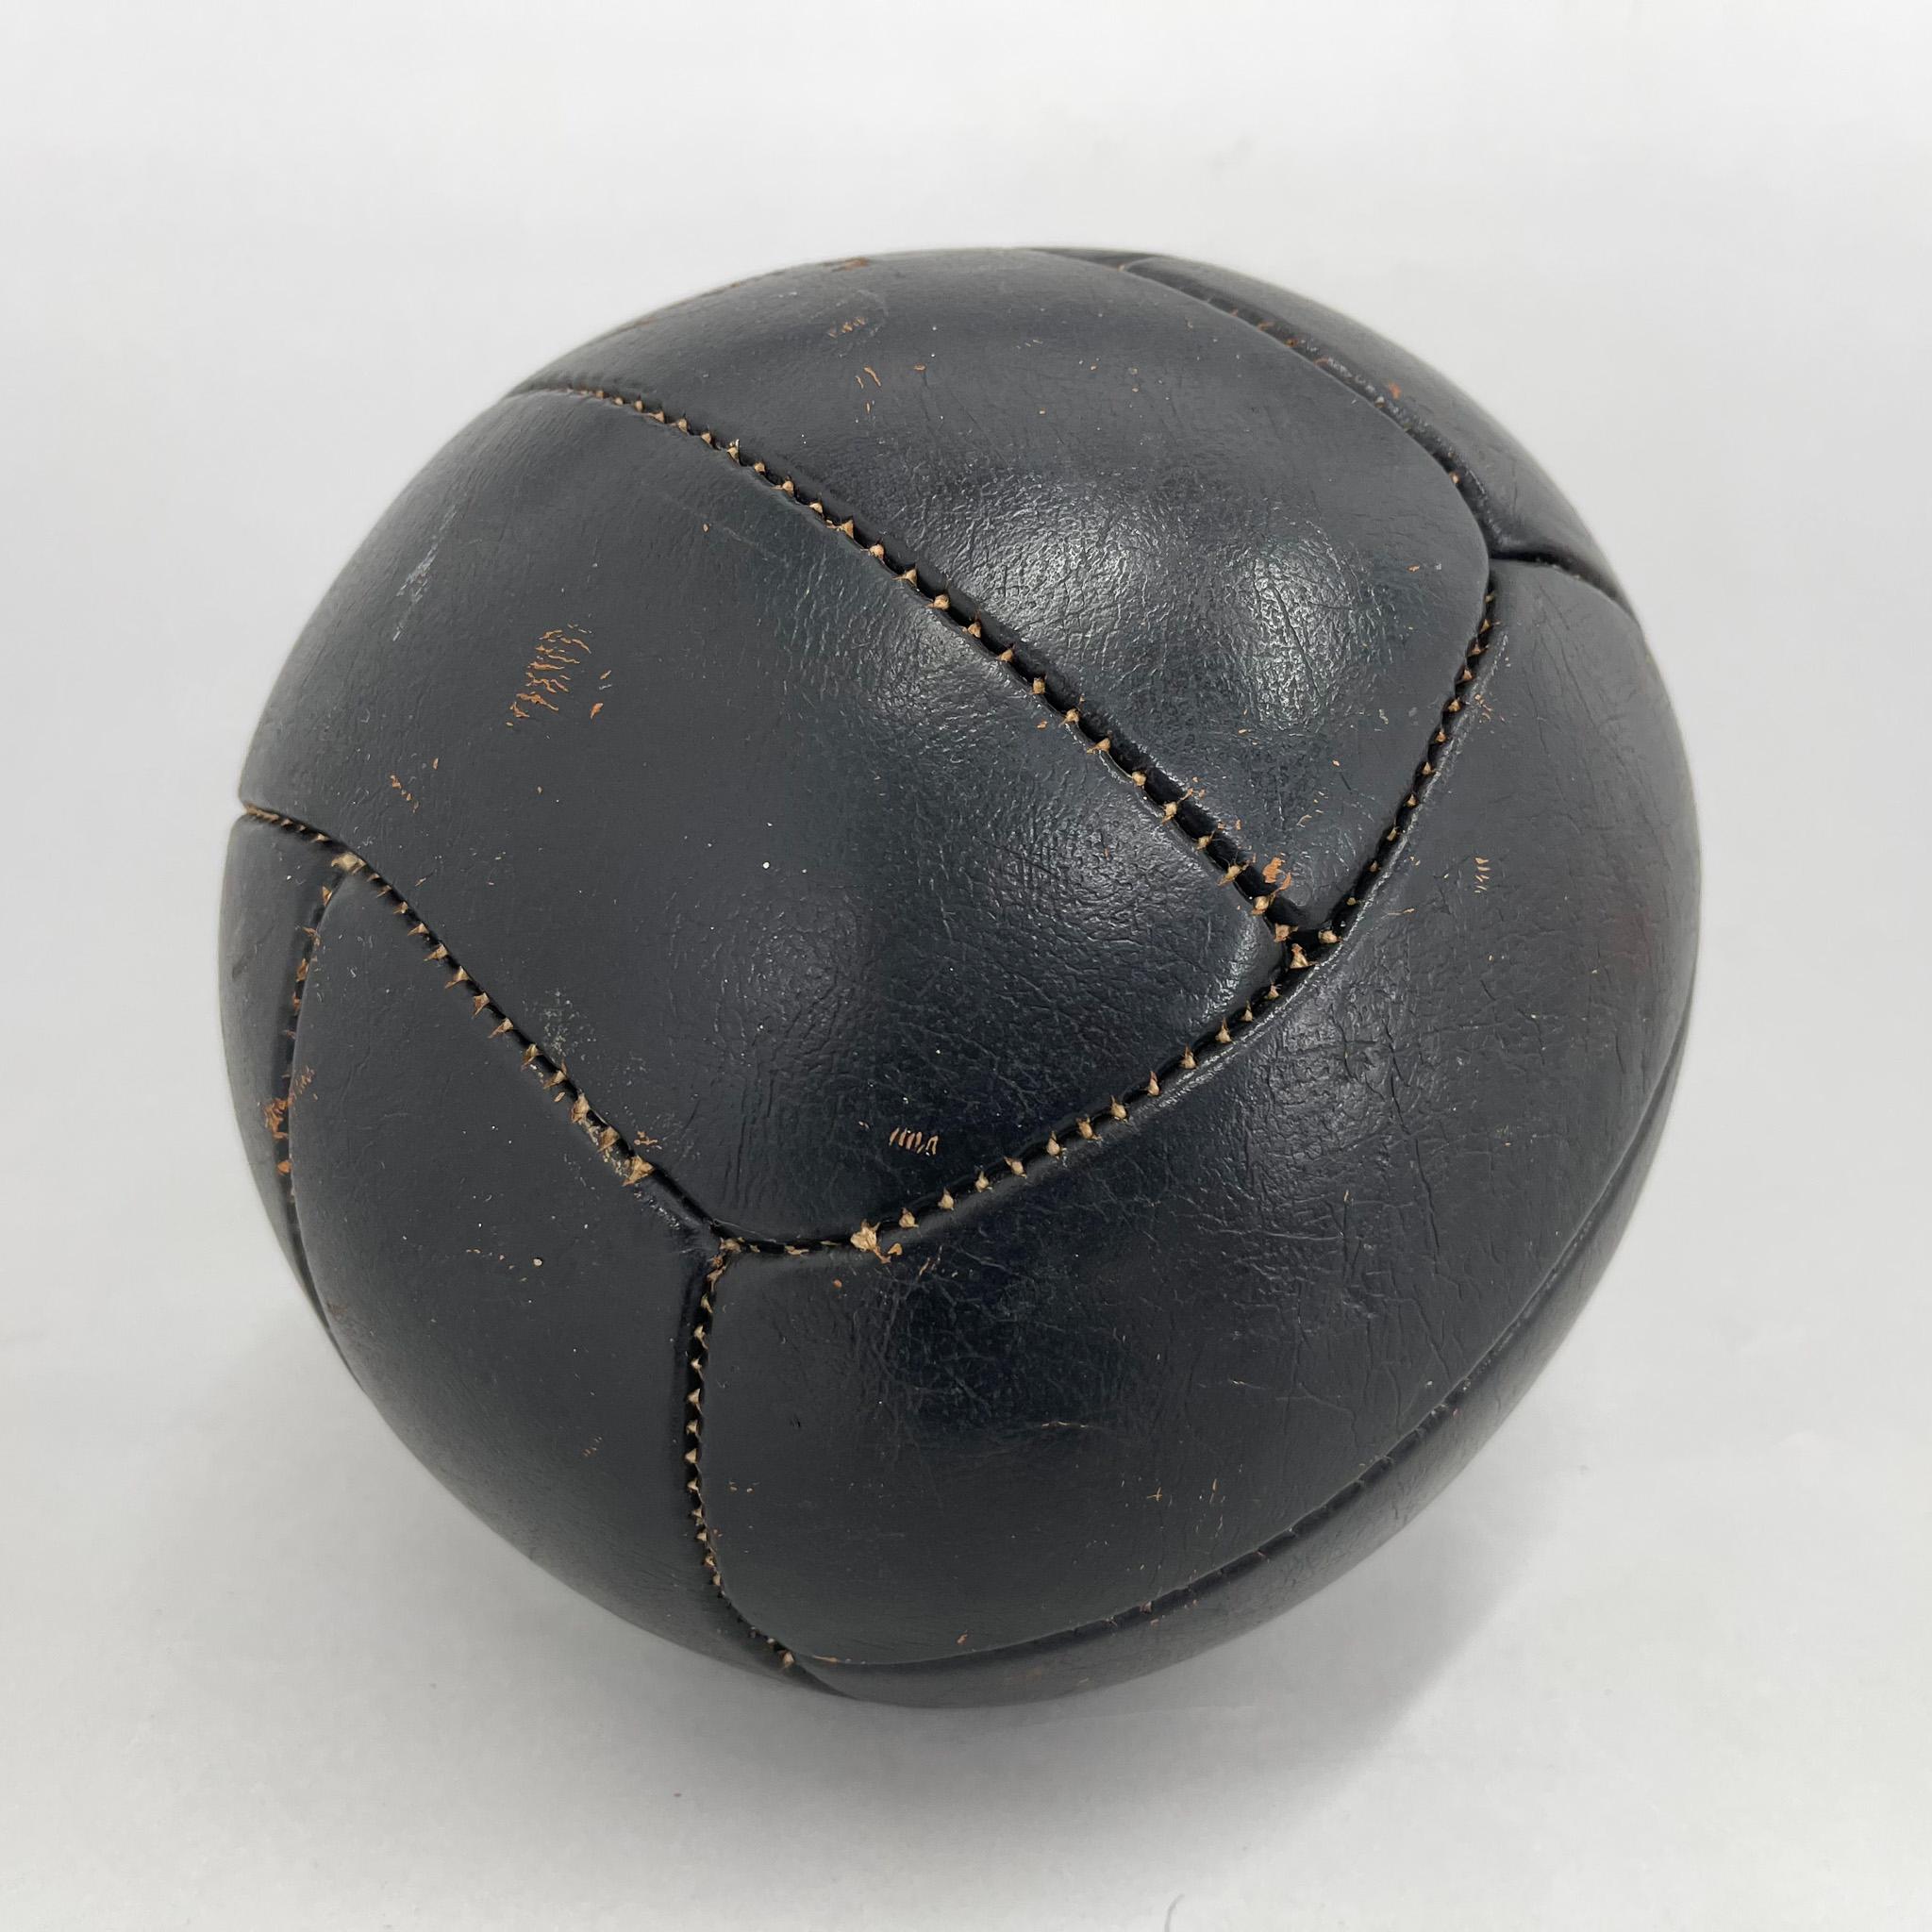 heavy leather ball